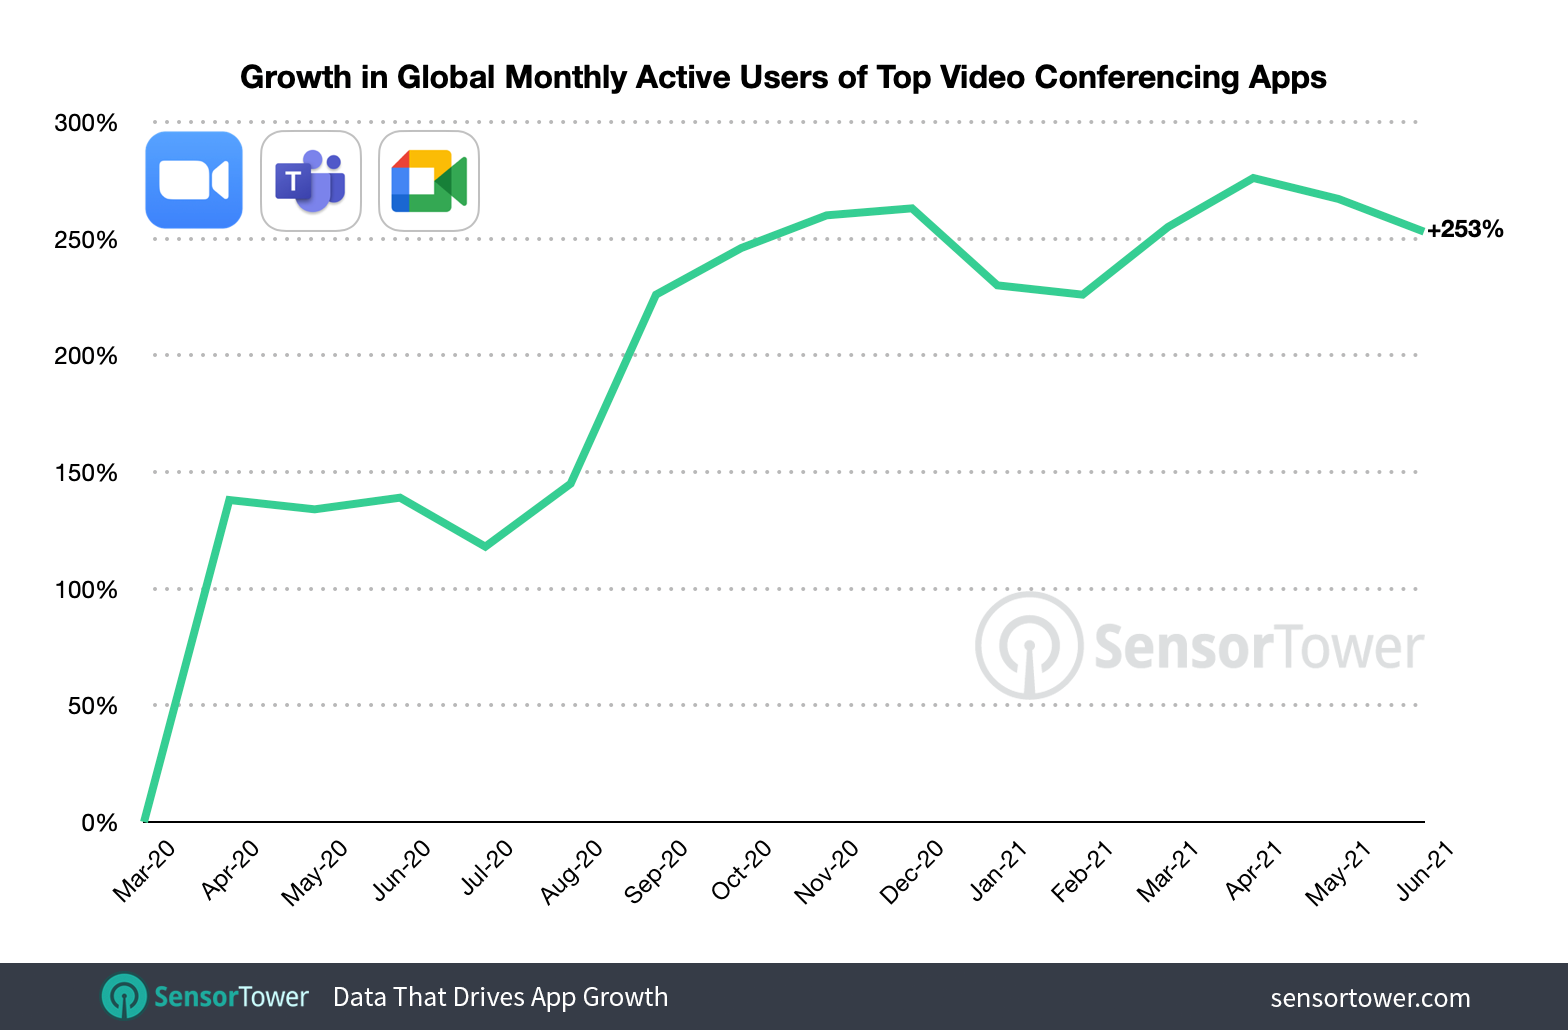 Videoconferencing app usage 'hits 21 times pre-Covid levels'